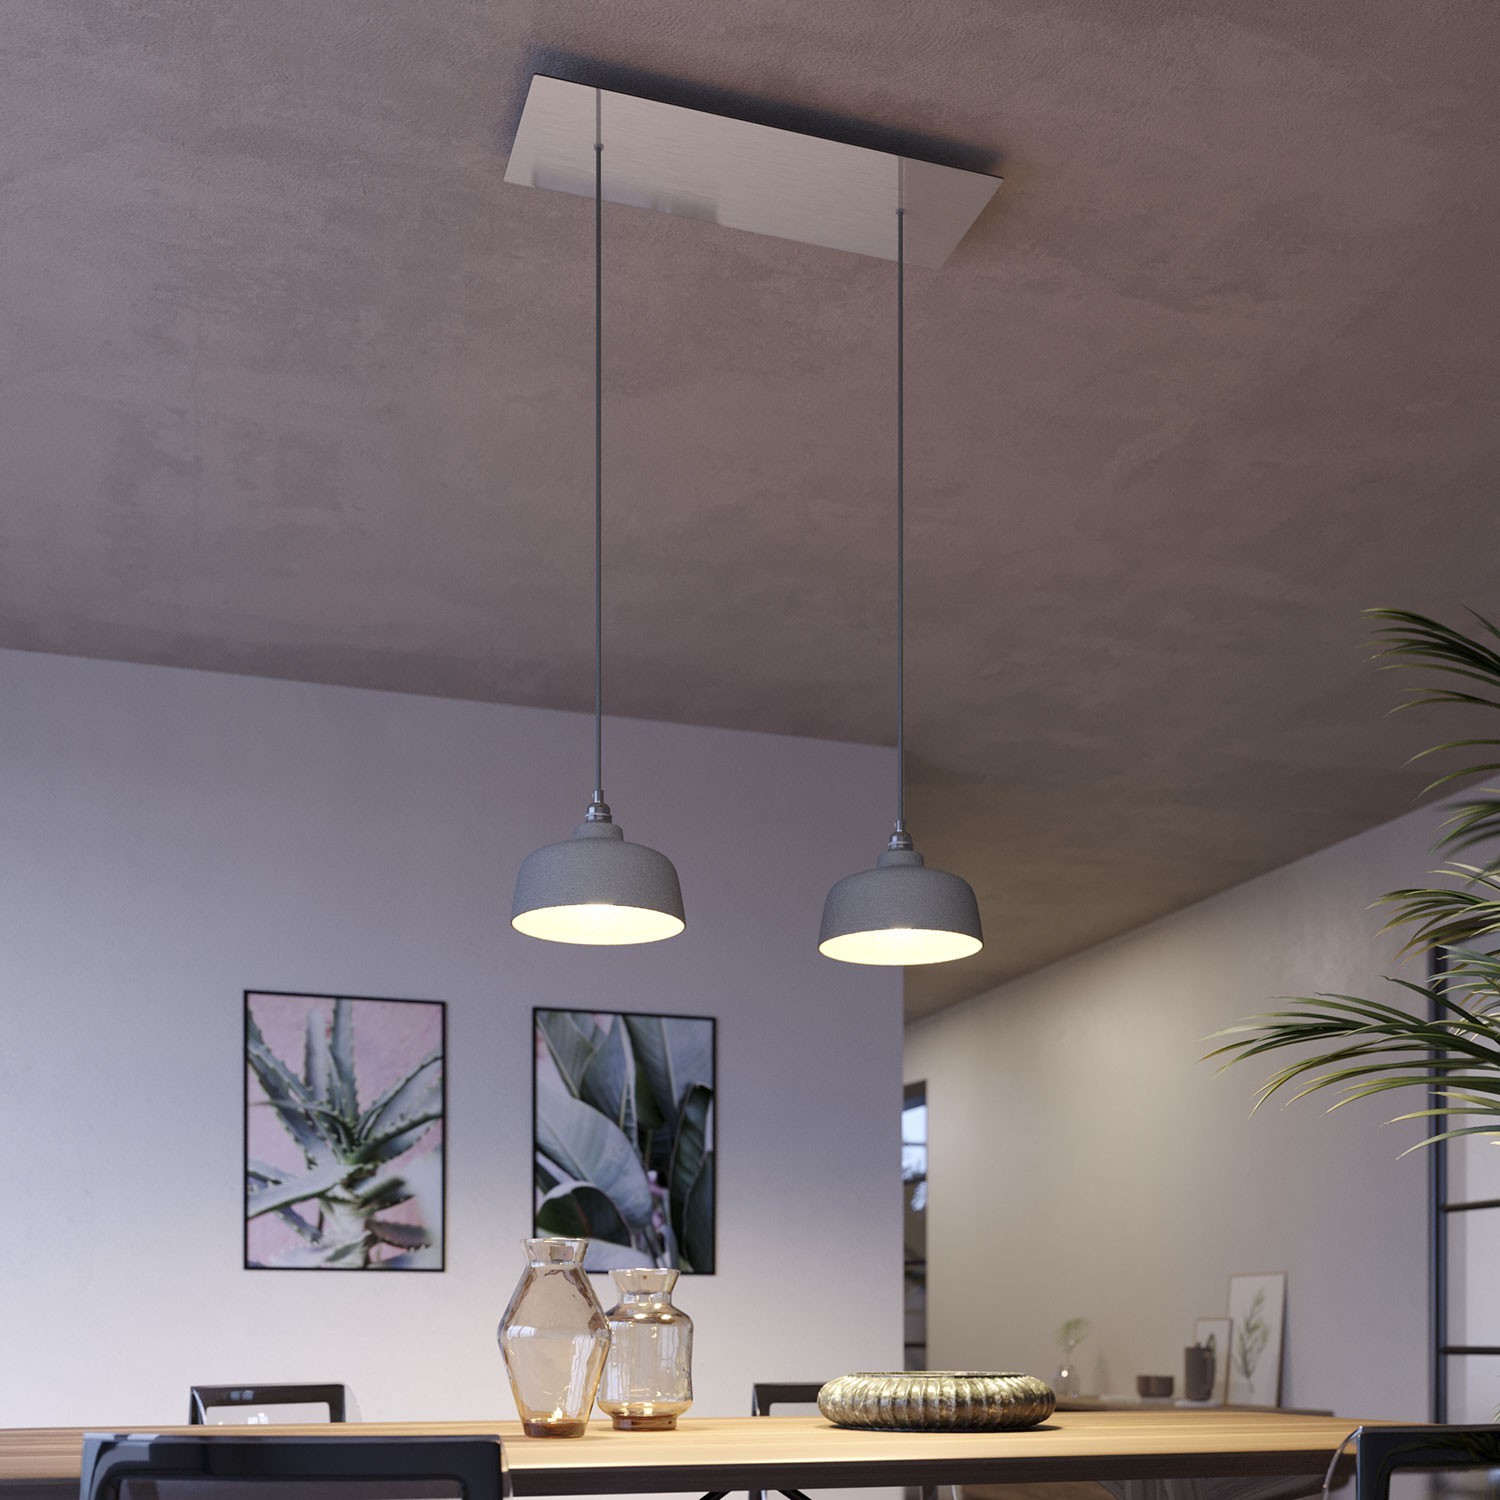 2-light pendant lamp with 675 mm rectangular XXL Rose-One, featuring with fabric cable and Coppa lampshade